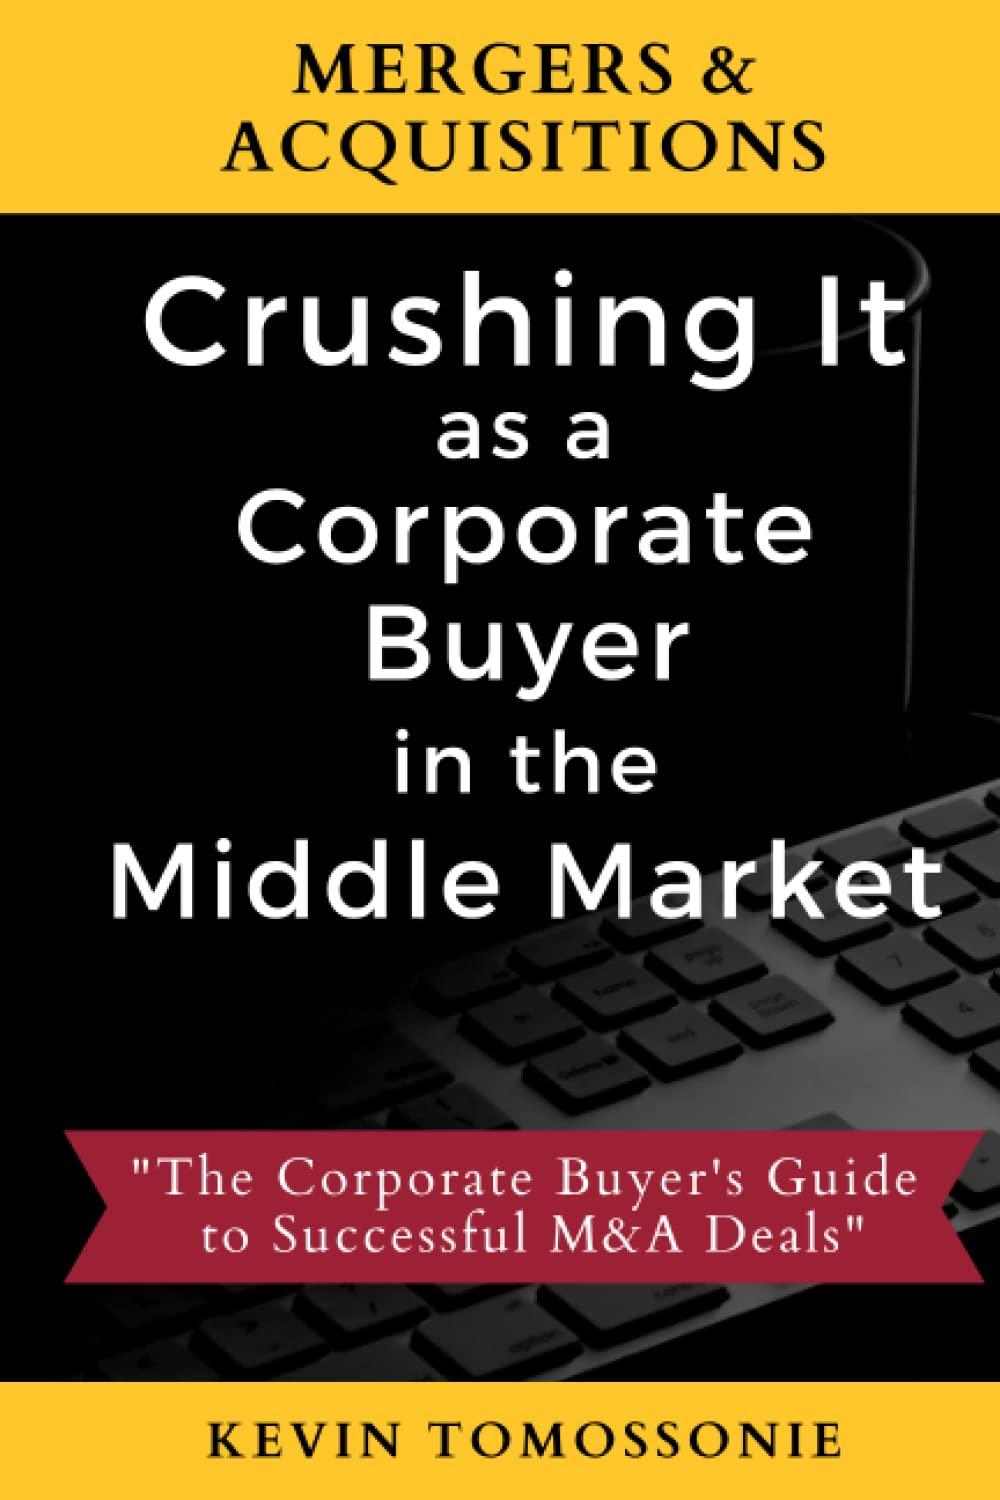 mergers and acquisitions crushing it as a corporate buyer in the middle market the corporate buyers guide to